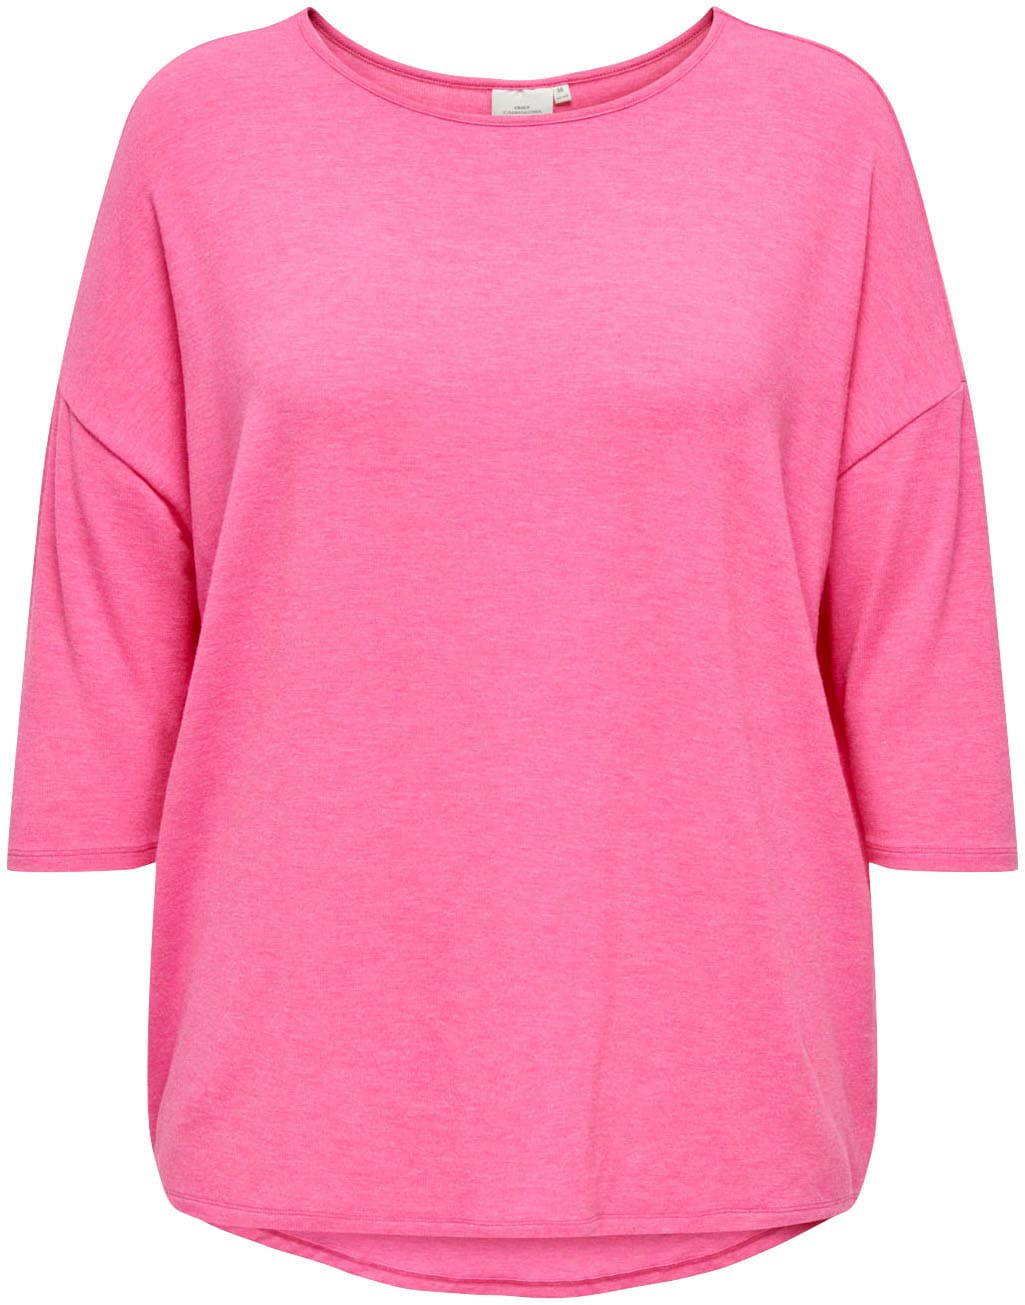 ONLY CARMAKOMA 3/4-Arm-Shirt »CARLAMOUR 3/4 TOP JRS NOOS« kaufen bei OTTO